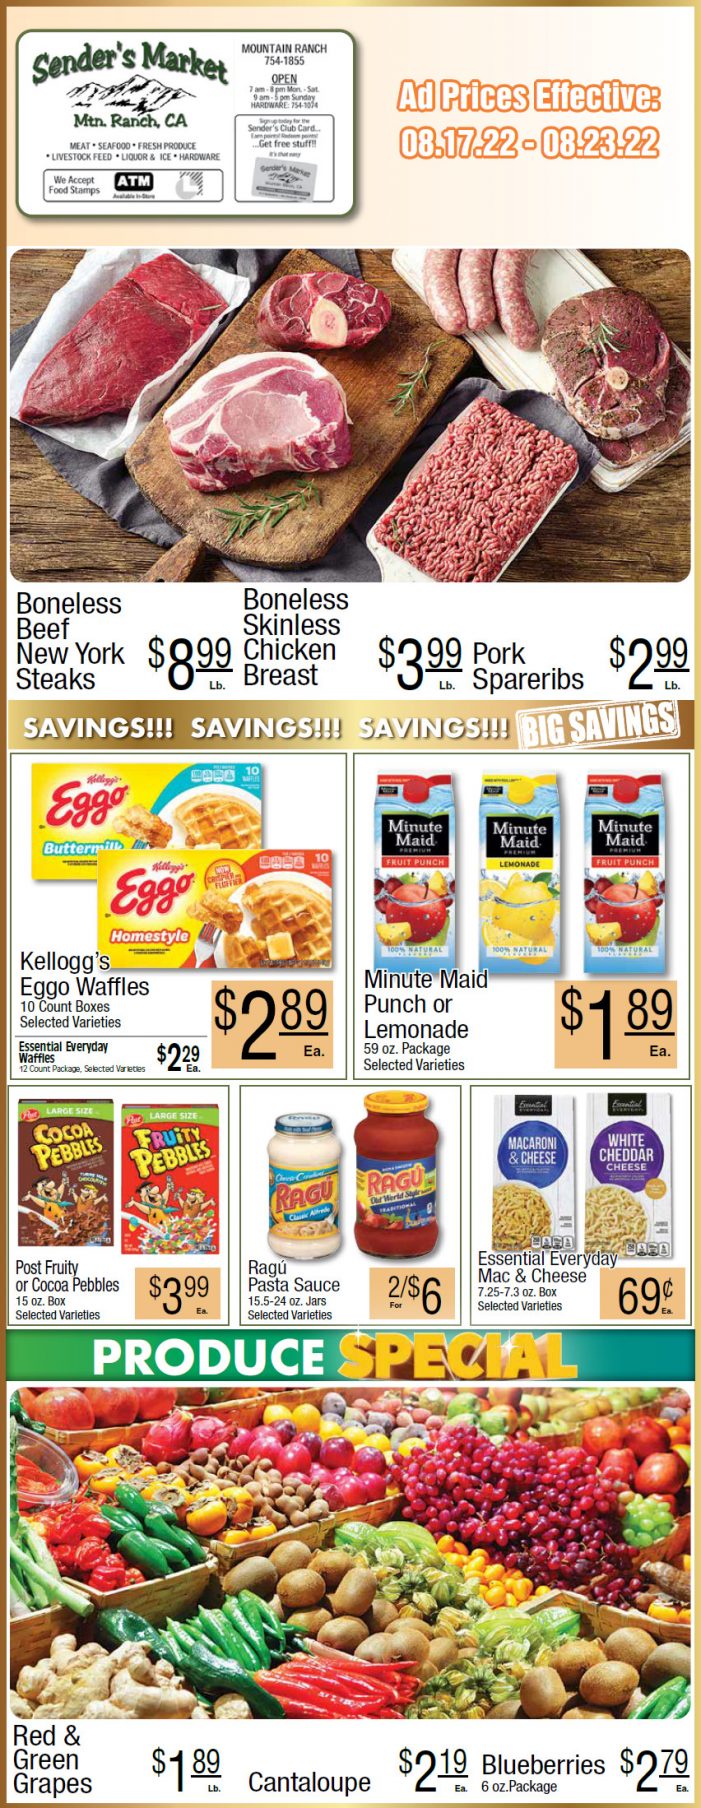 Sender’s Market Weekly Ad & Grocery Specials Through August 23rd! Shop Local & Save!